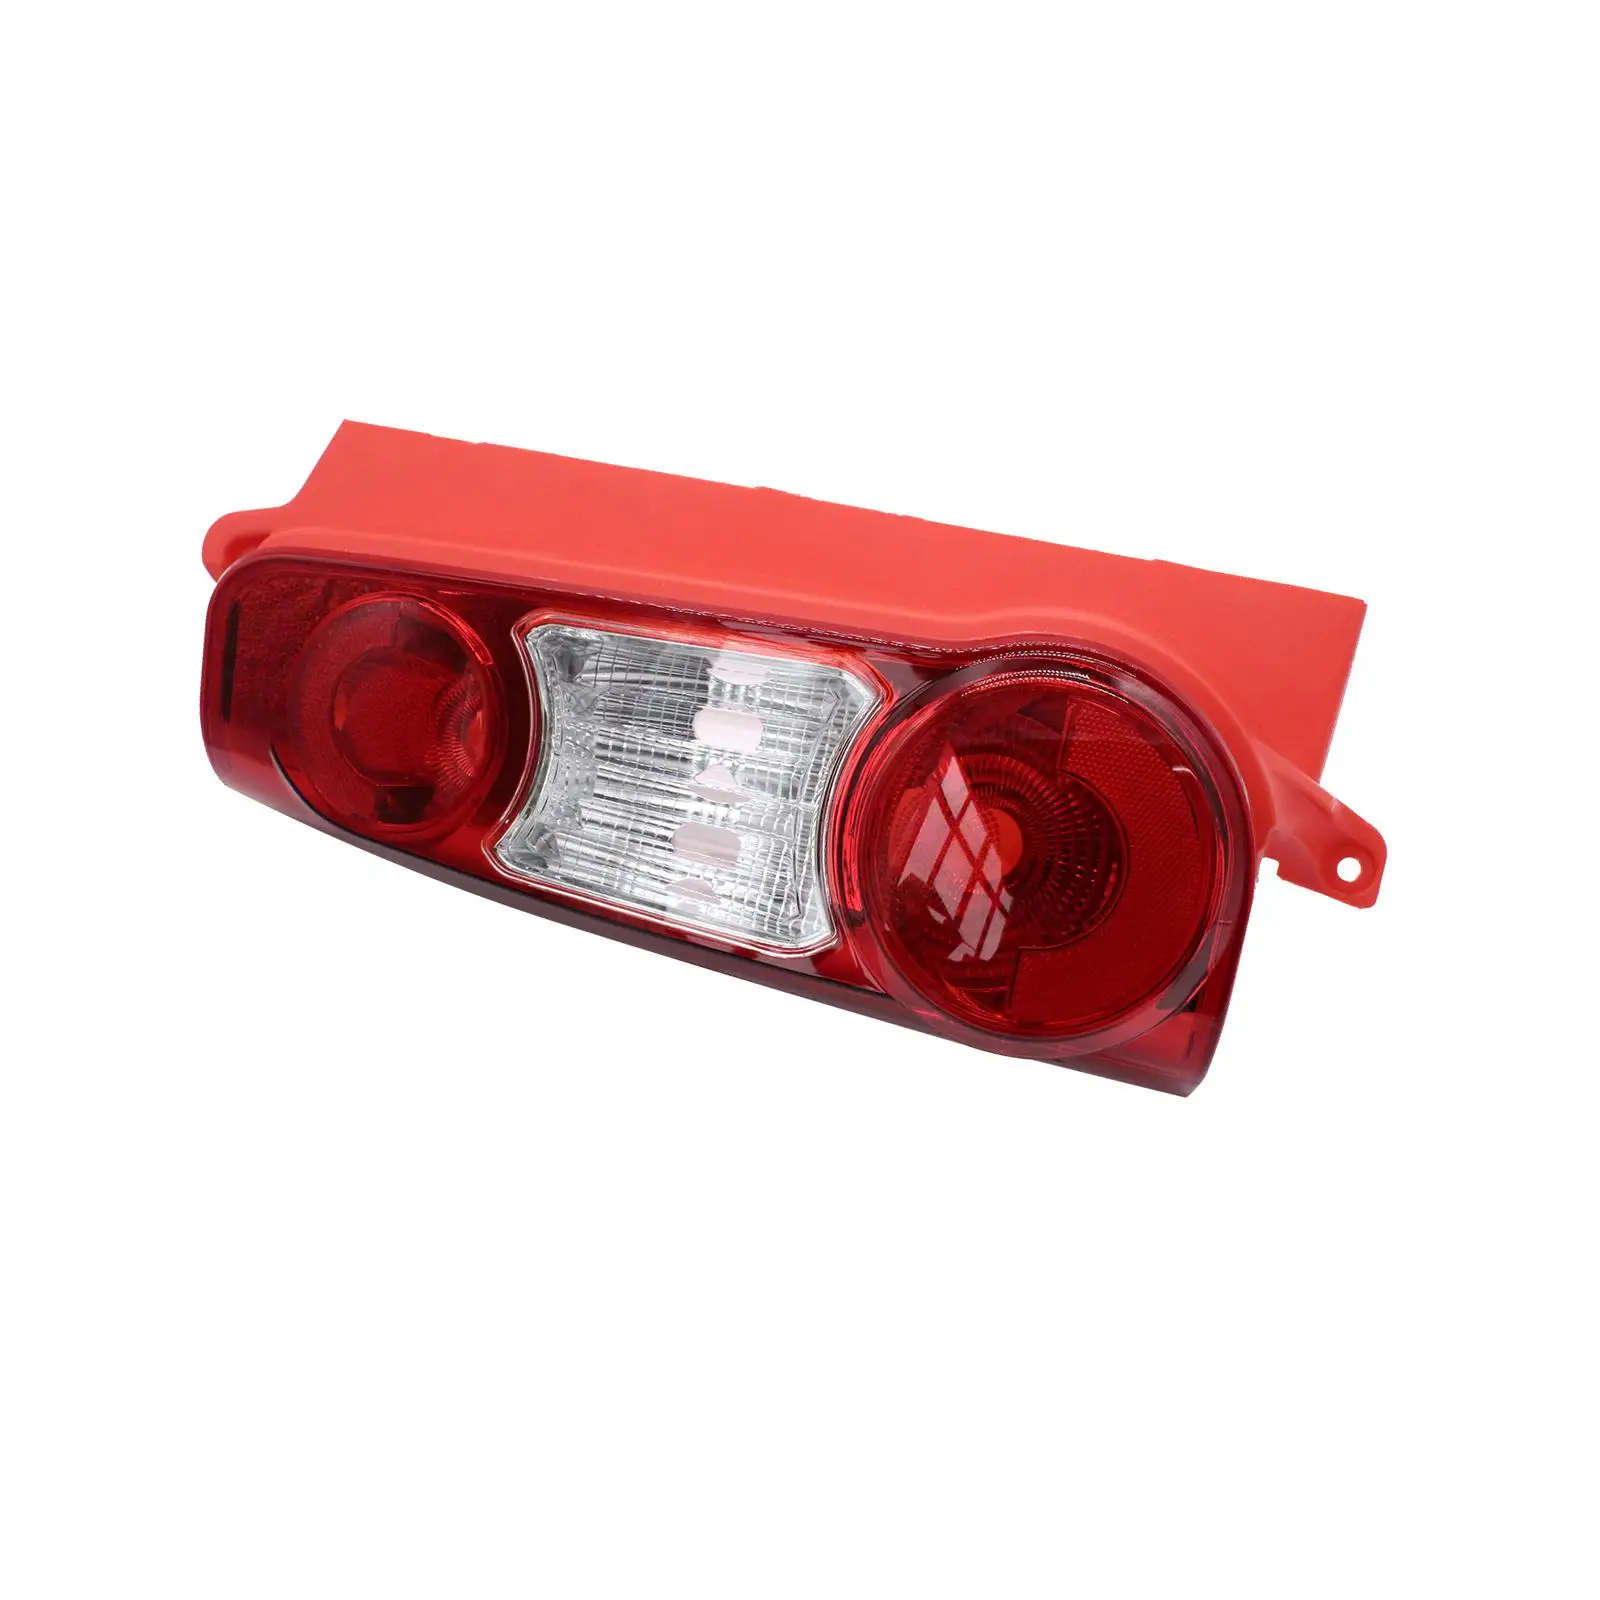 Rear Tail Light Lamp Assembly 6350FJ Repair Parts Tail Lights for Peugeot Partner 2008-2012 Left Side Durable Accessories